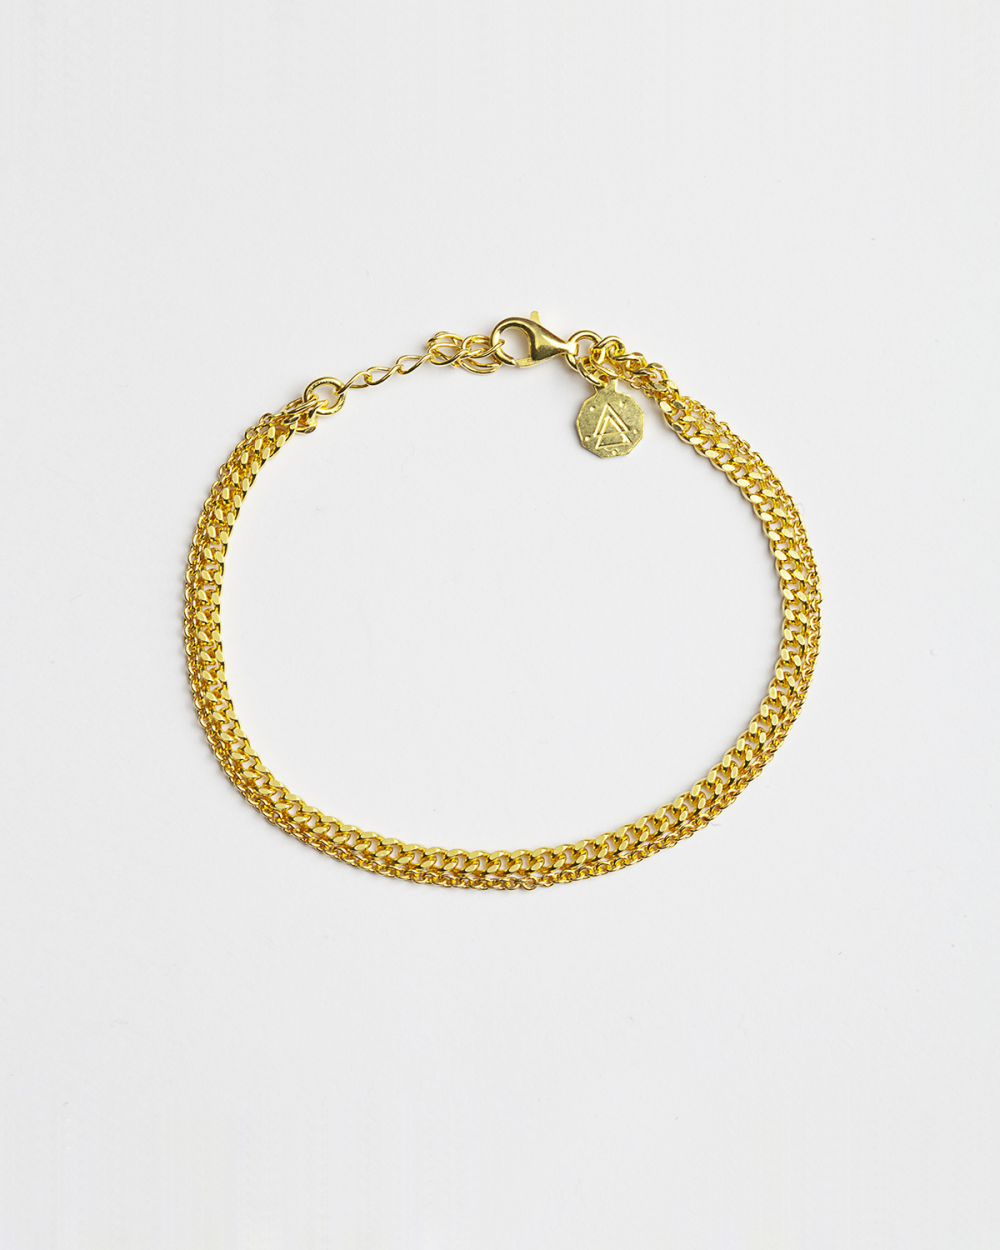 YELLOW GOLD TWO LAYERS CURB & CABLE CHAIN BRACELET